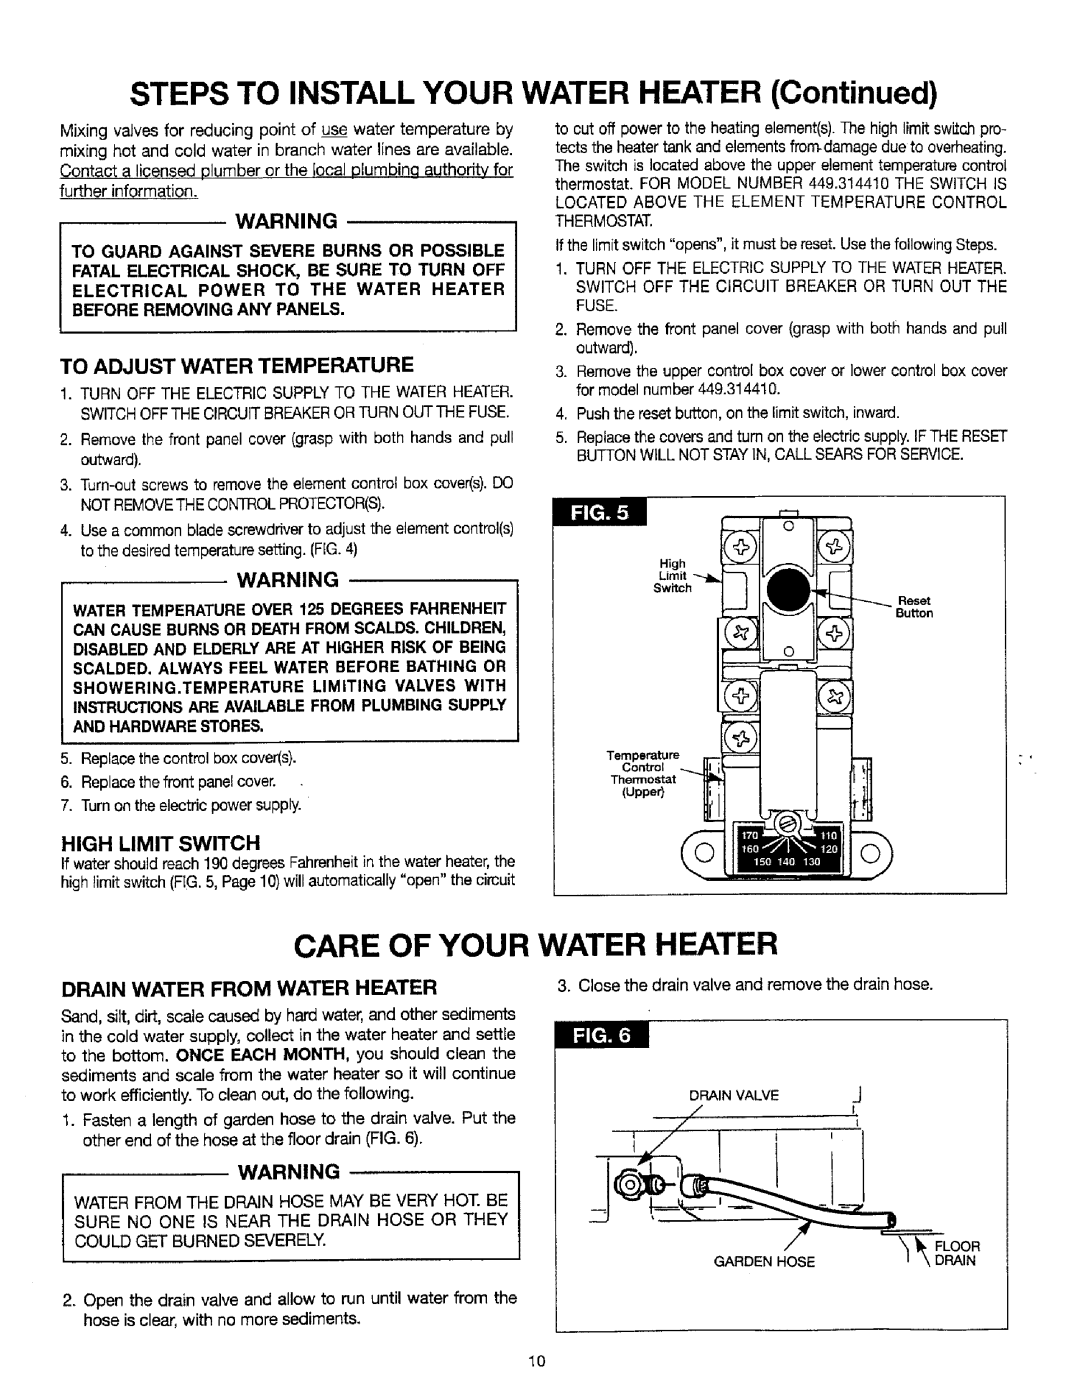 Sears 449.314410 SHORT, 449.320411, 449.320511 Care Of Your Water Heater, To Adjust Water Temperature, High Limit Switch 